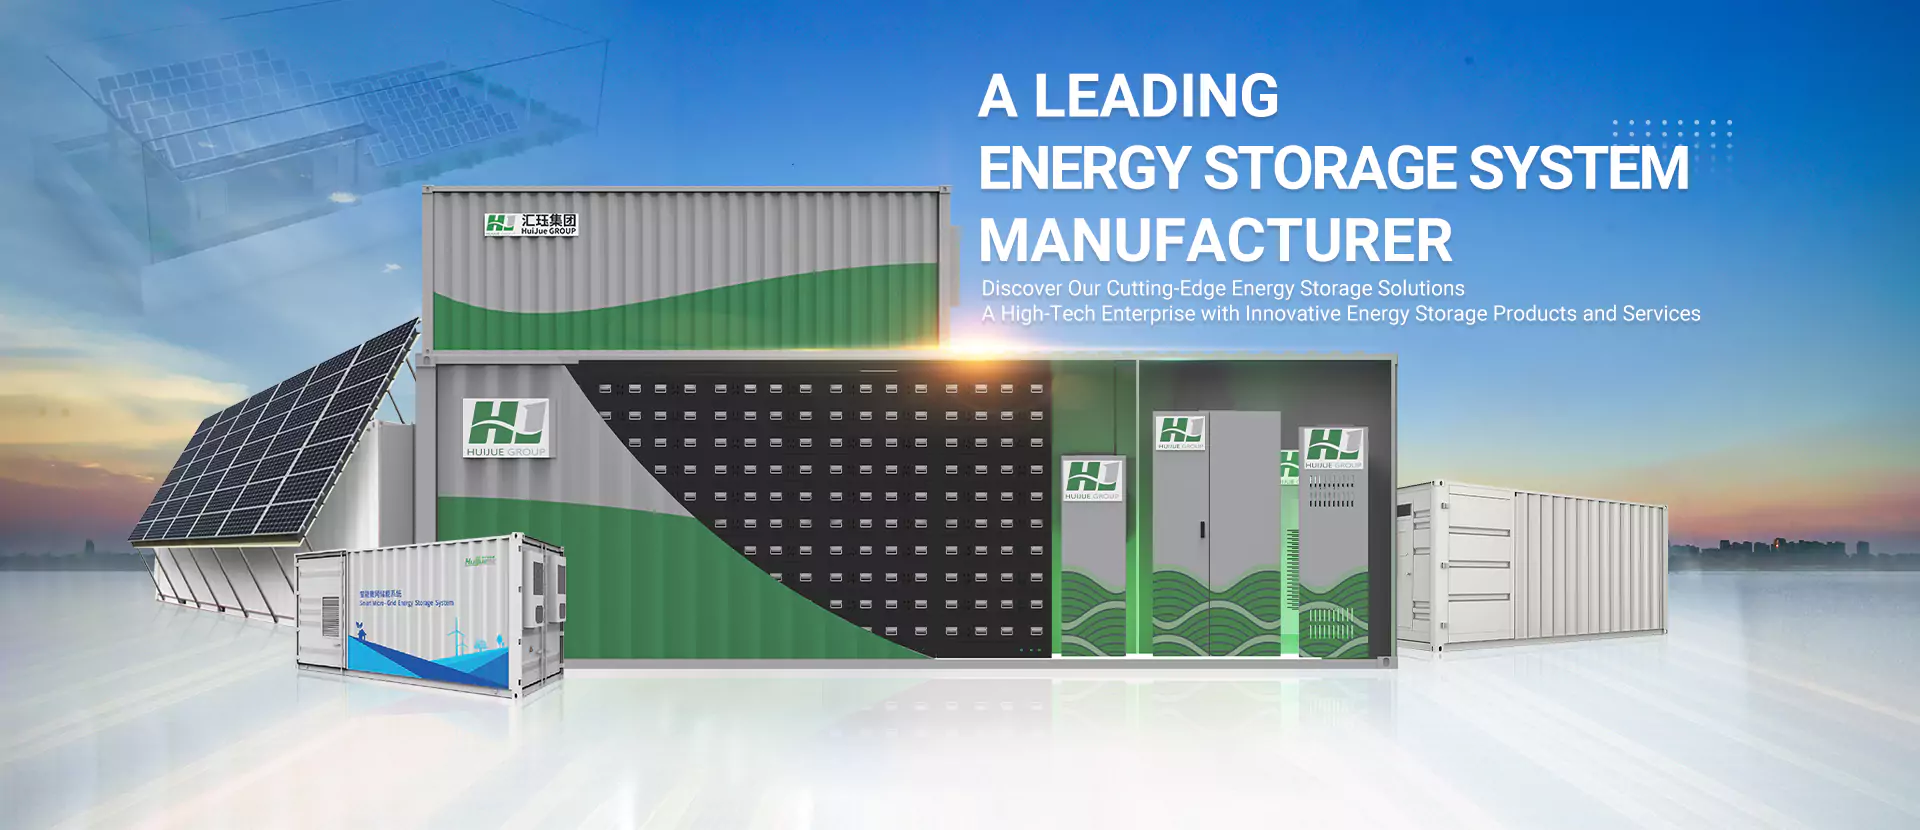 Energy storage products, microgrid solutions